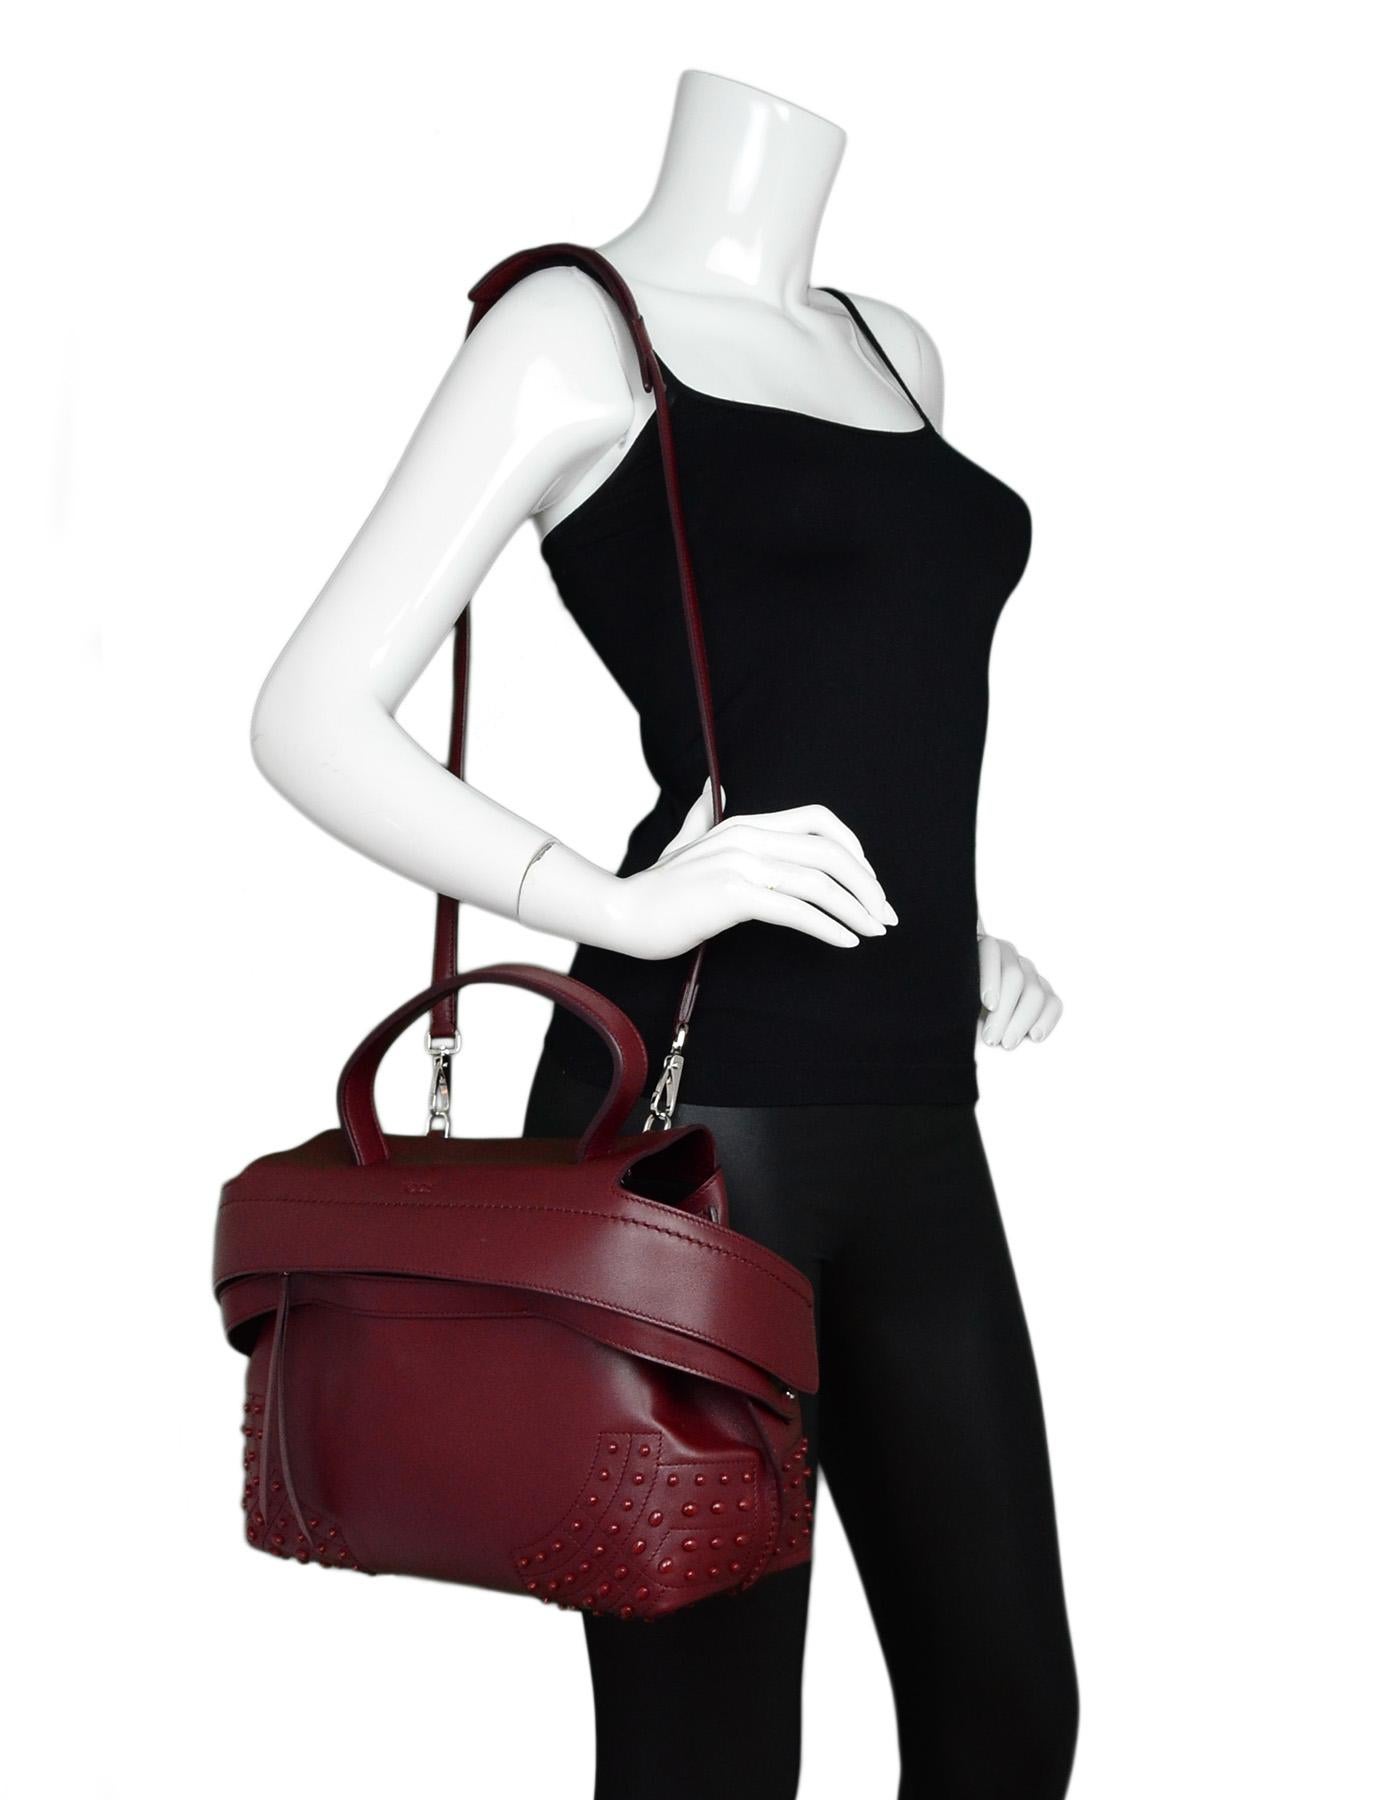 Tod's Burgundy Leather Small Wave Top Handle Shoulder Bag NEW

Made In: Italy
Color: Burgundy 
Hardware: Silvertone
Materials: Leather
Lining: Black textile
Closure/Opening: Flap top with concealed front zipper
Exterior Pockets: Rear pocket with